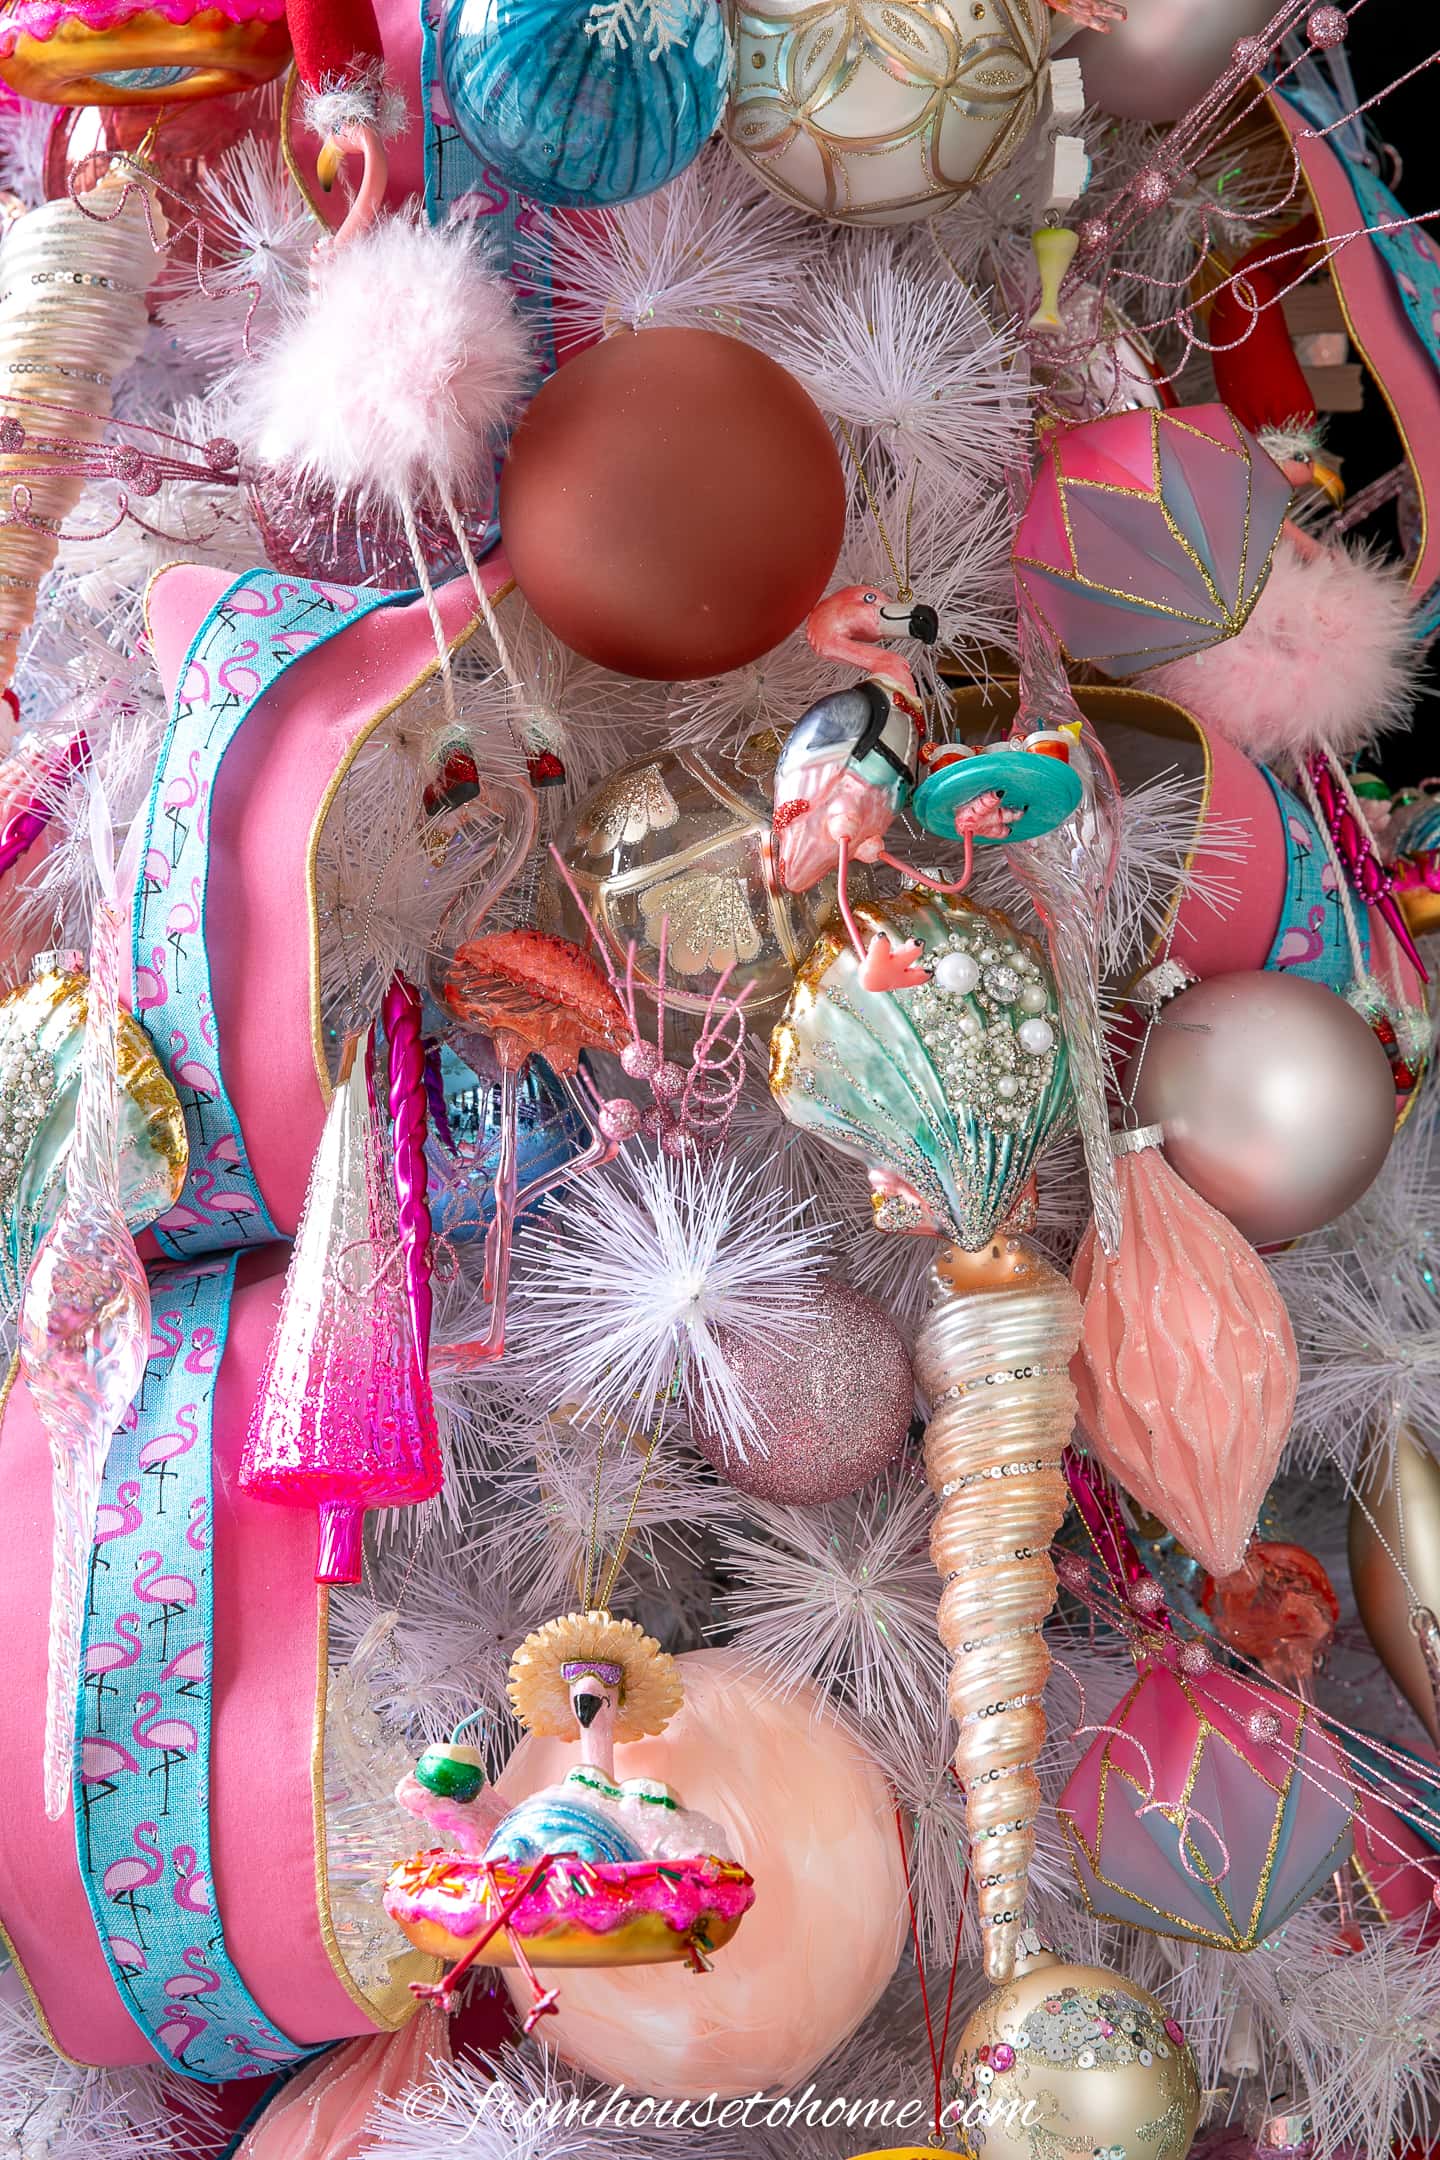 A flamingo-themed Christmas tree decorated with pink and teal ornaments.